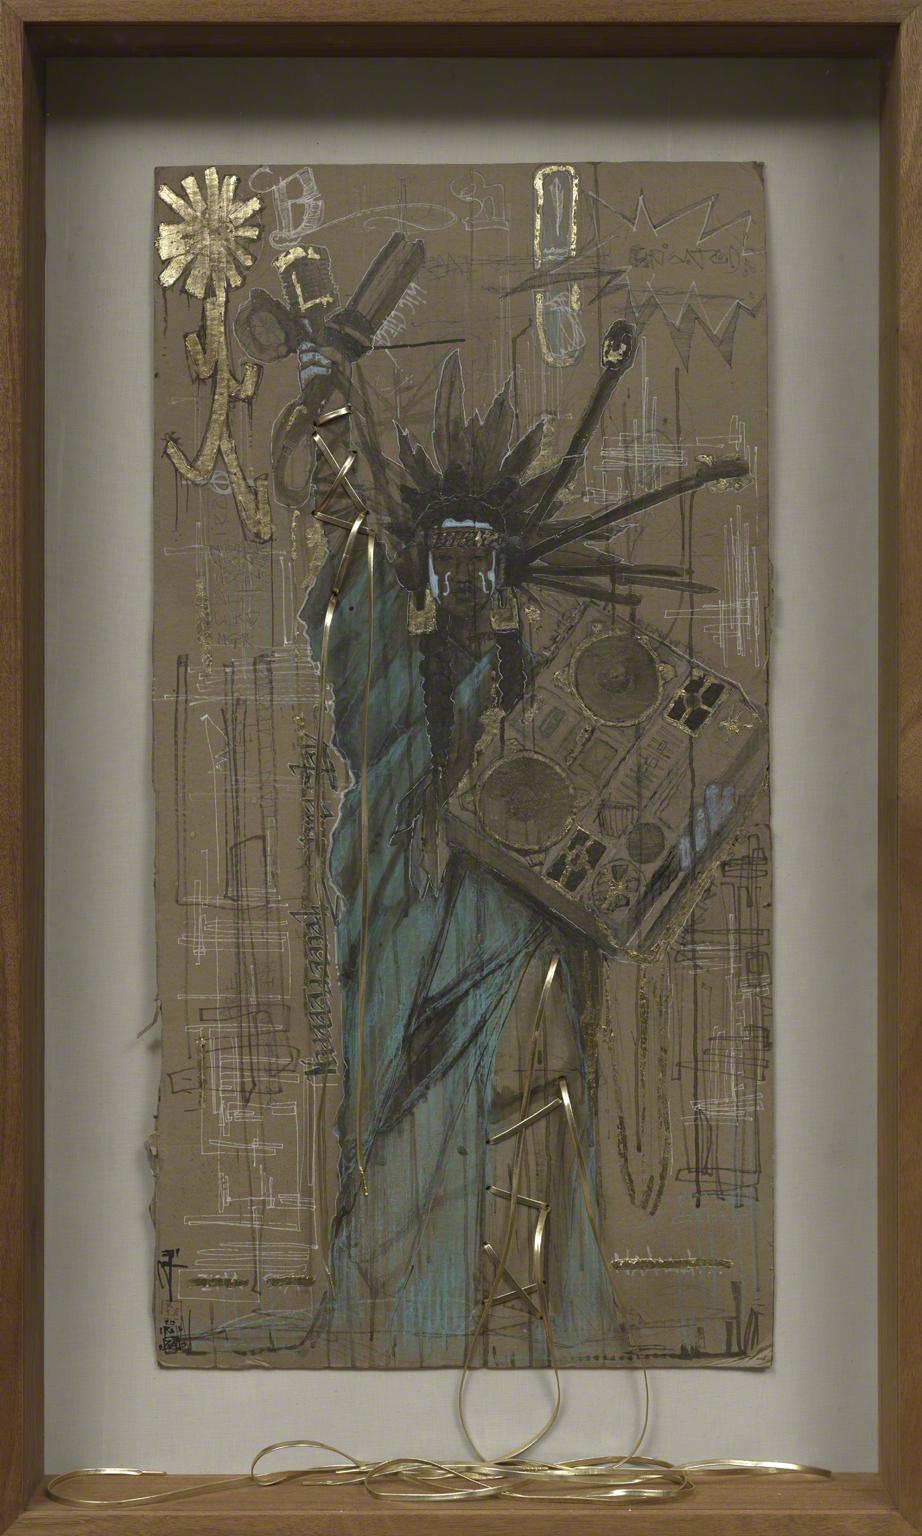 Drawing on carboard of the Staute of Liberty as a Native American woman holding a stereo with accents of gold and blue, green